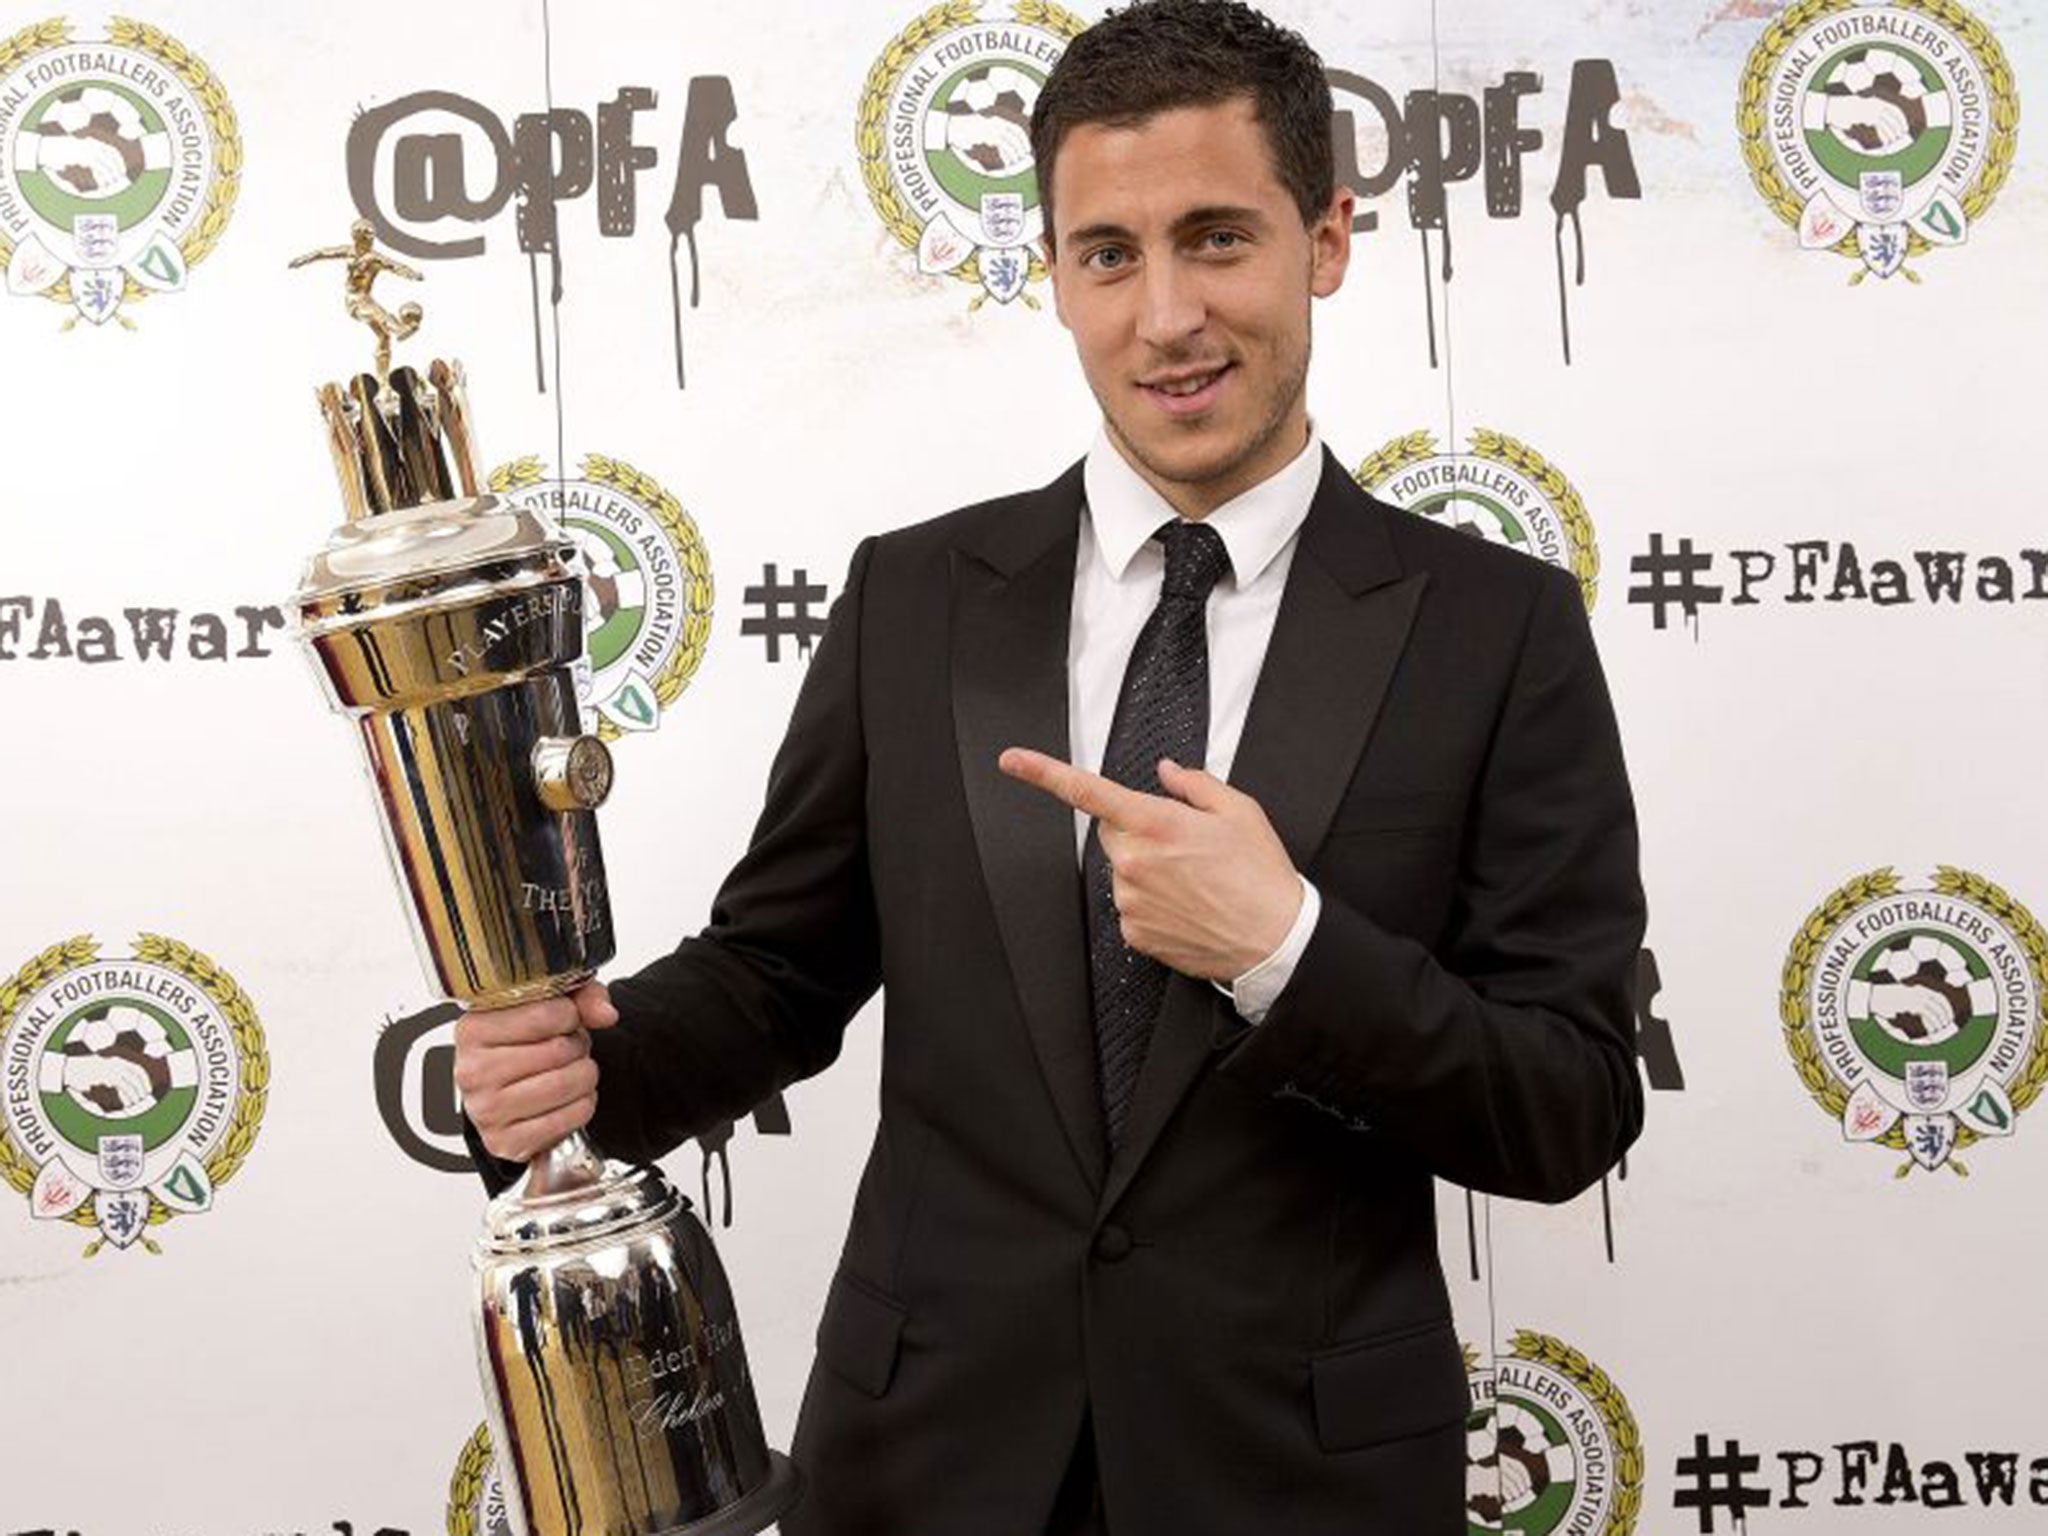 PFA Player of the Year Chelsea's Eden Hazard takes the top prize after